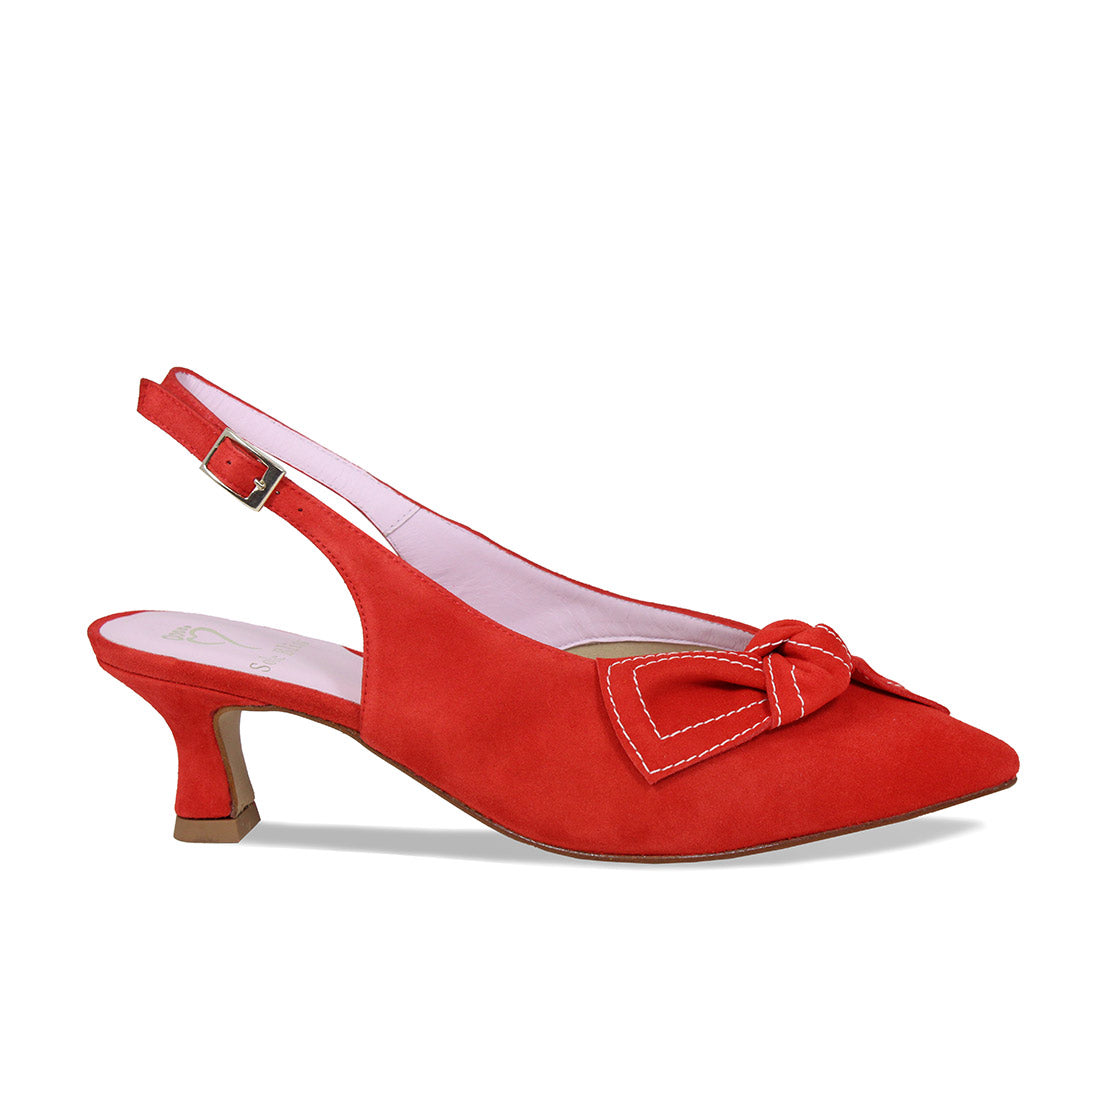 Court shoes - Coral - Ladies | H&M IN